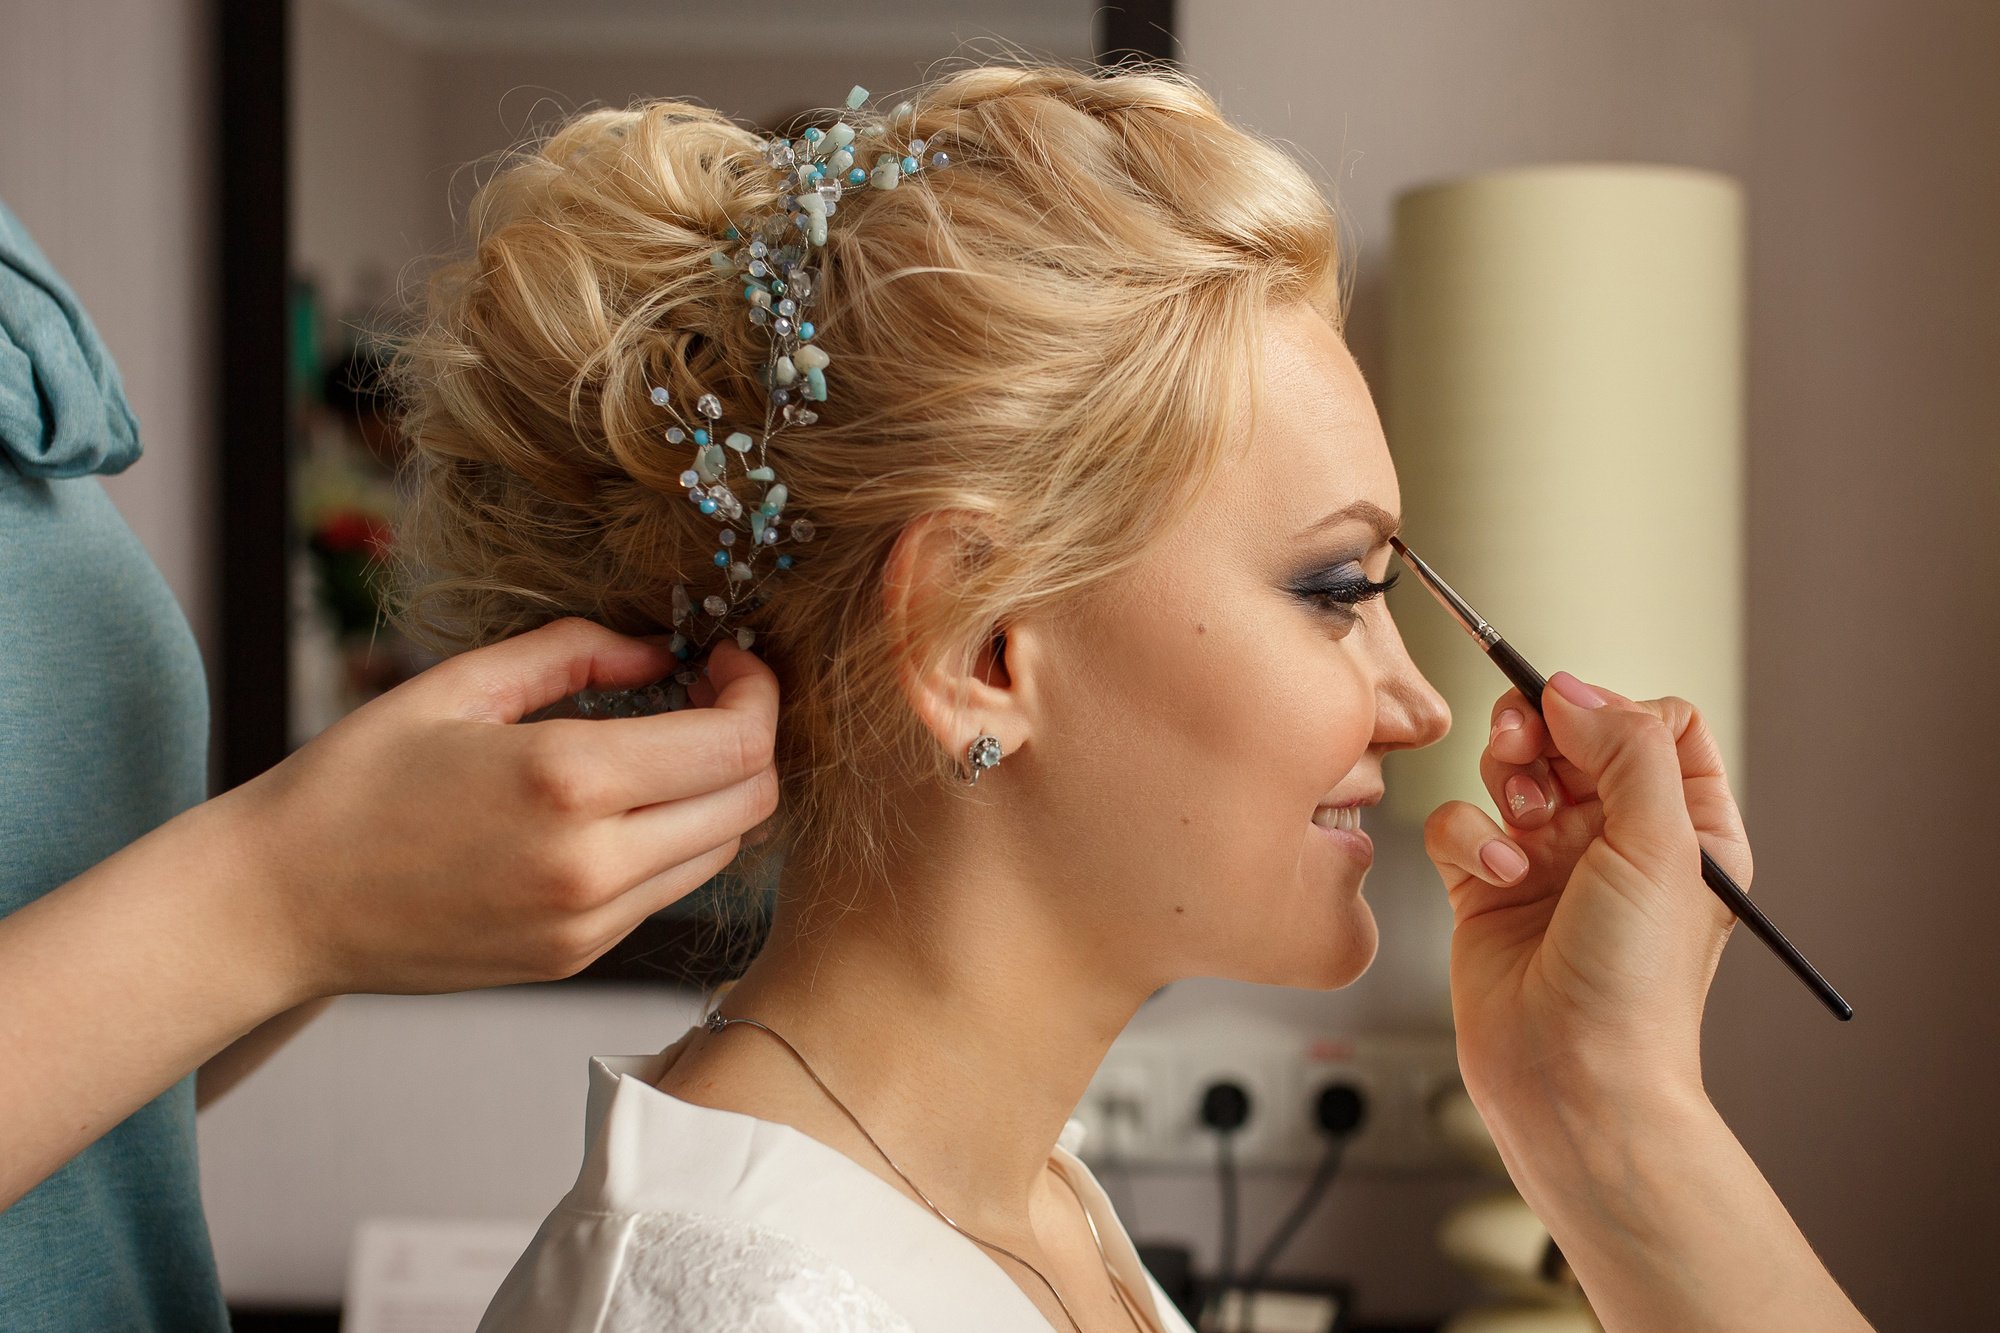 Top 5 Questions to Ask before Choosing a Wedding Makeup Artist